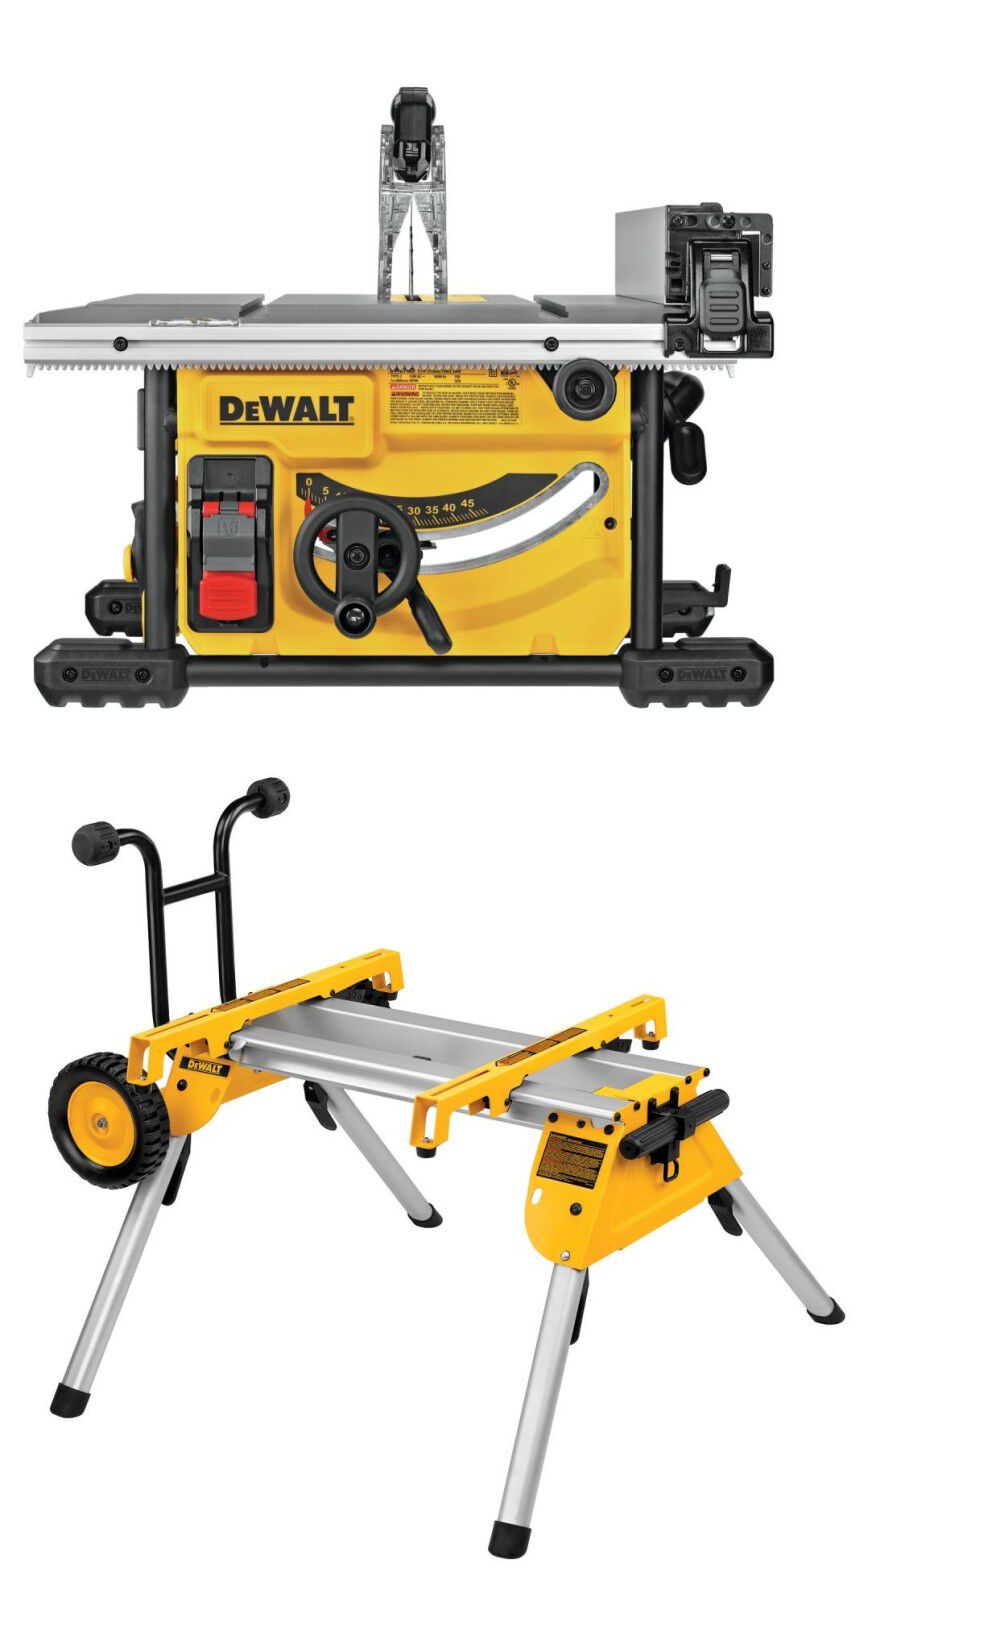 DEWALT 8 1/4in Compact Jobsite Table Saw with Rolling Stand Bundle